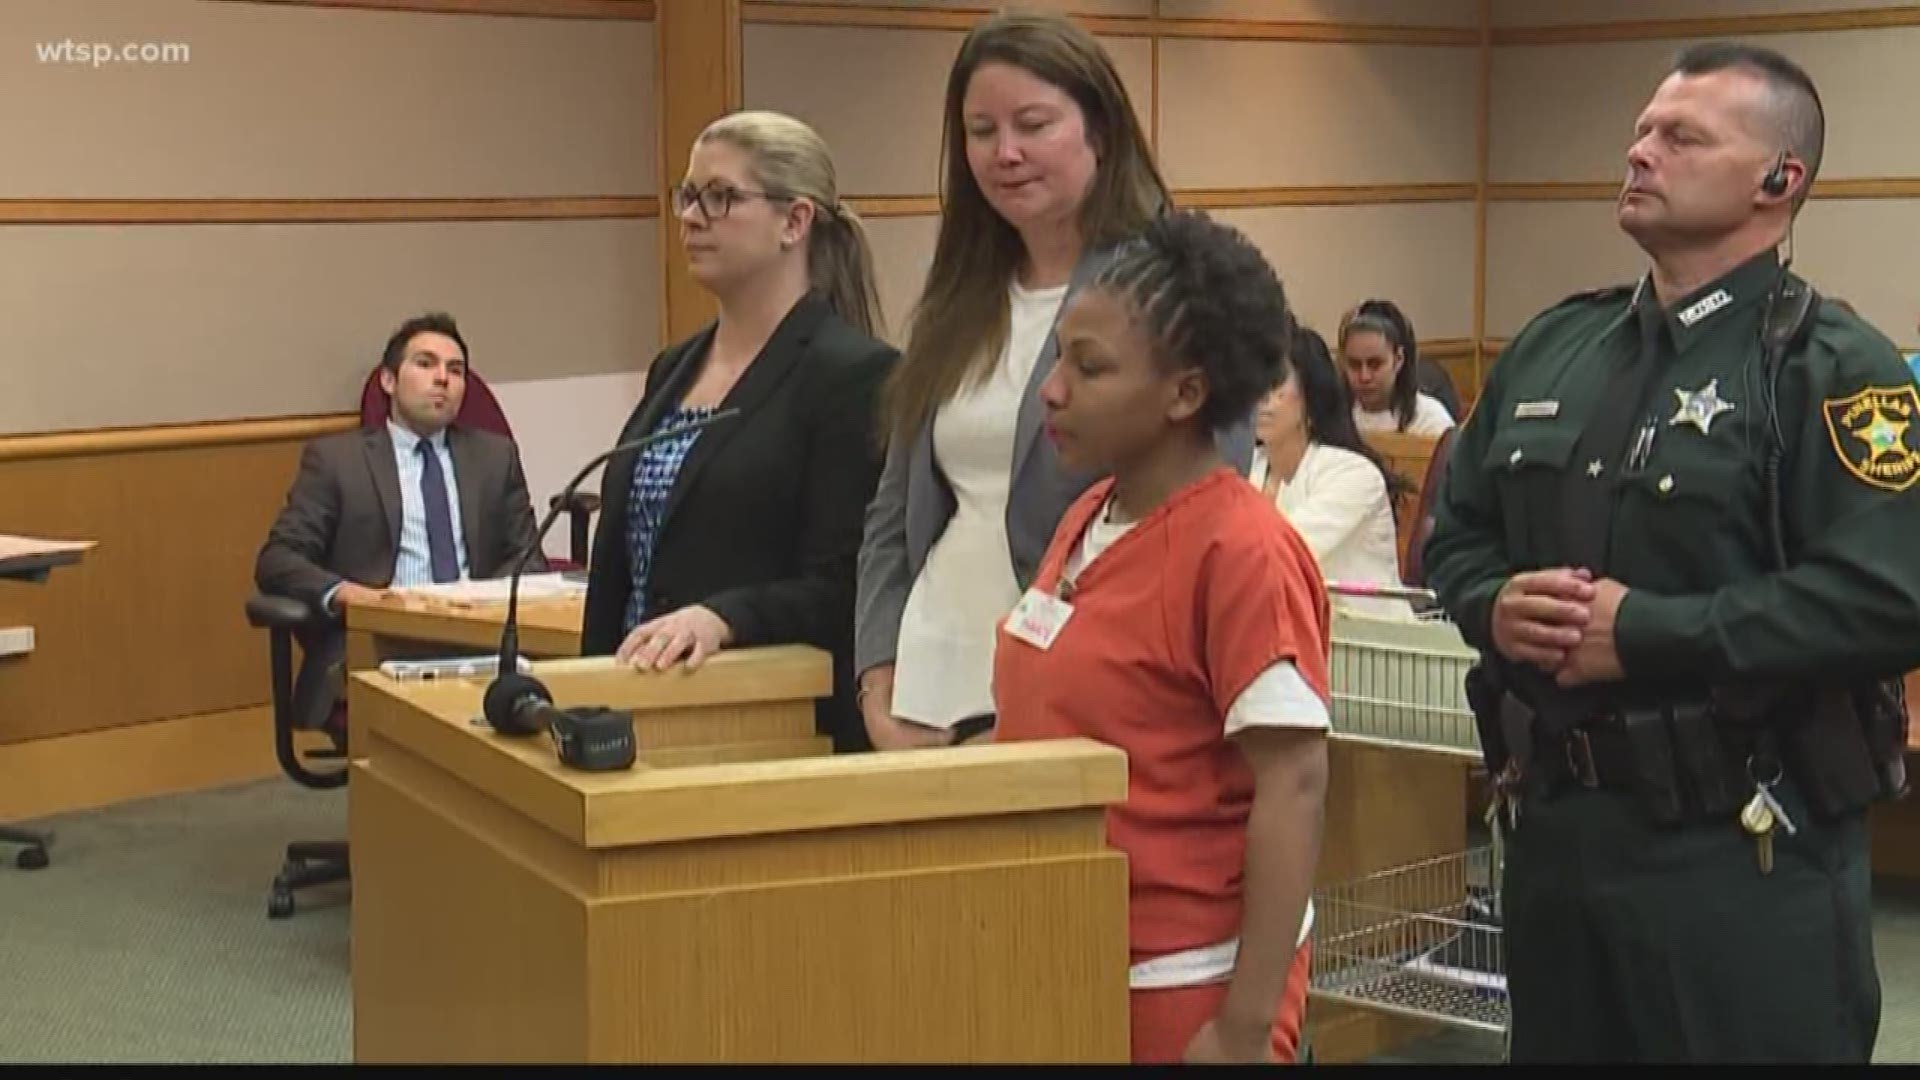 A judge set the trial date for next year for a Largo mother accused of killing her 2-year-old son.

Charisse Stinson's trial is set for March 2, 2020. She is charged with first-degree murder in the death of her son, Jordan Belliveau.

Some 35 people are expected to testify in the case. In court Tuesday morning, Stinson’s lawyers said they would be asking for a change of venue for the trial.

In addition to the murder charge, Stinson faces a charge of providing false information to a law enforcement agency during an investigation.

Police said Stinson lied about Belliveau's disappearance in September, which prompted an Amber Alert.

She claimed a man named Antwan offered her a ride and hit her in the face, knocking her unconscious, according to investigators. Detectives say she told them she woke up hours later in a wooded area of Largo Central Park and didn't know where Belliveau was. Investigators say that was all made-up.

In addition to murder, Stinson is charged with aggravated child abuse.

A pre-trial hearing for Stinson is scheduled for July 9.